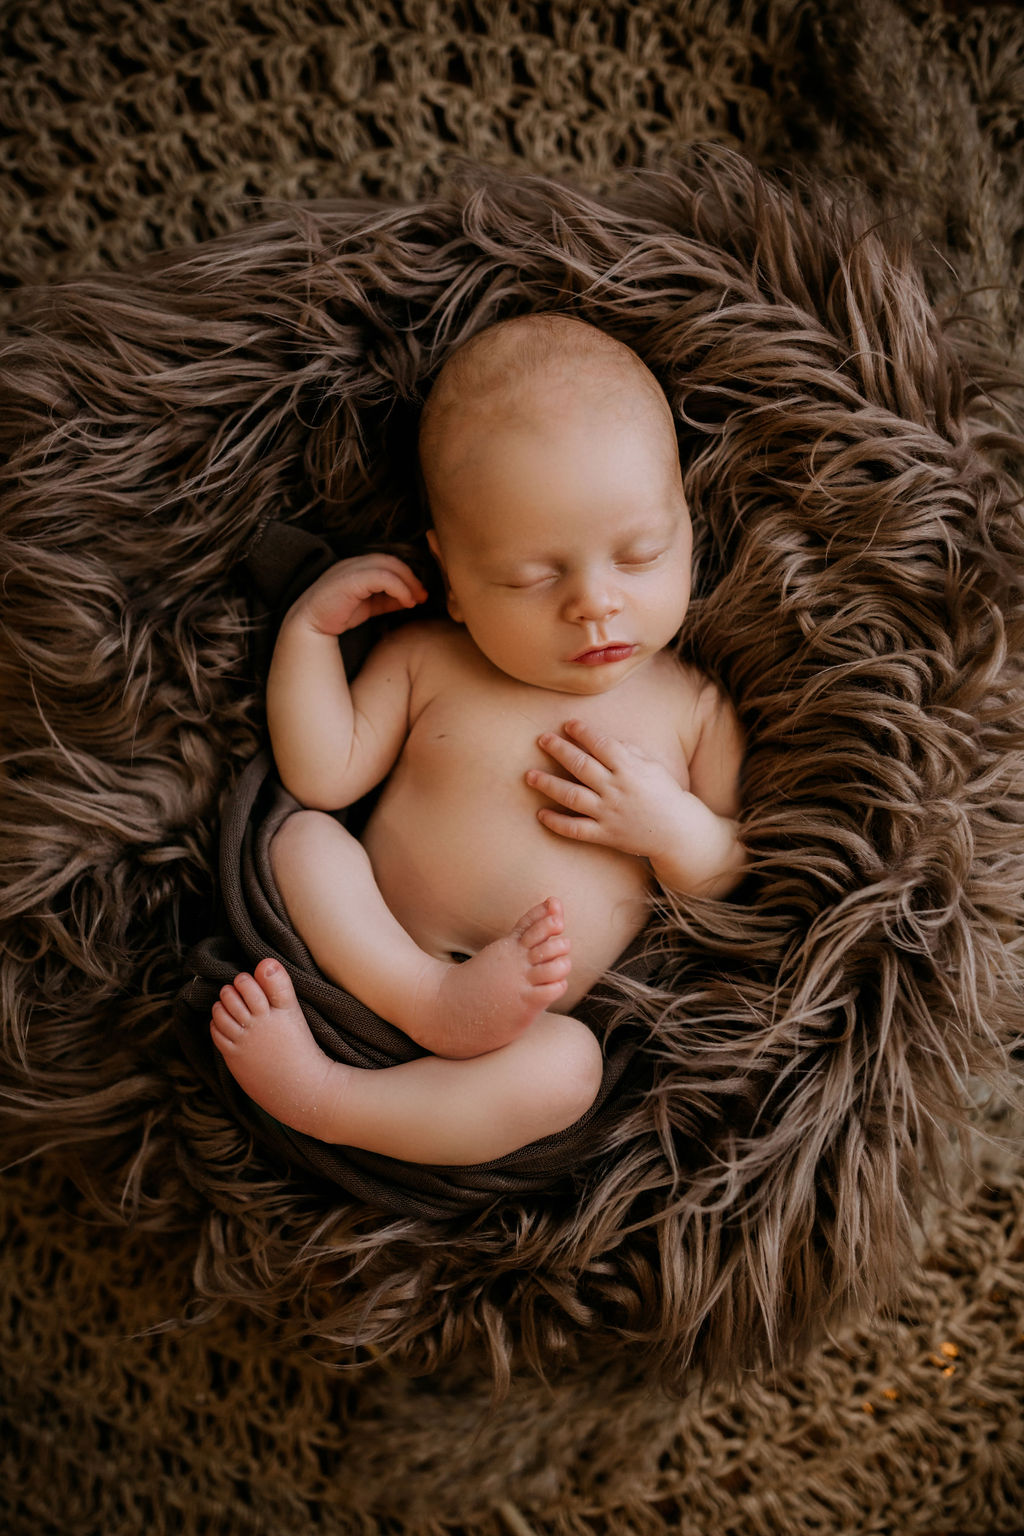 Newborn baby sleeps naked in a brown fur blanket first impressions stephens city